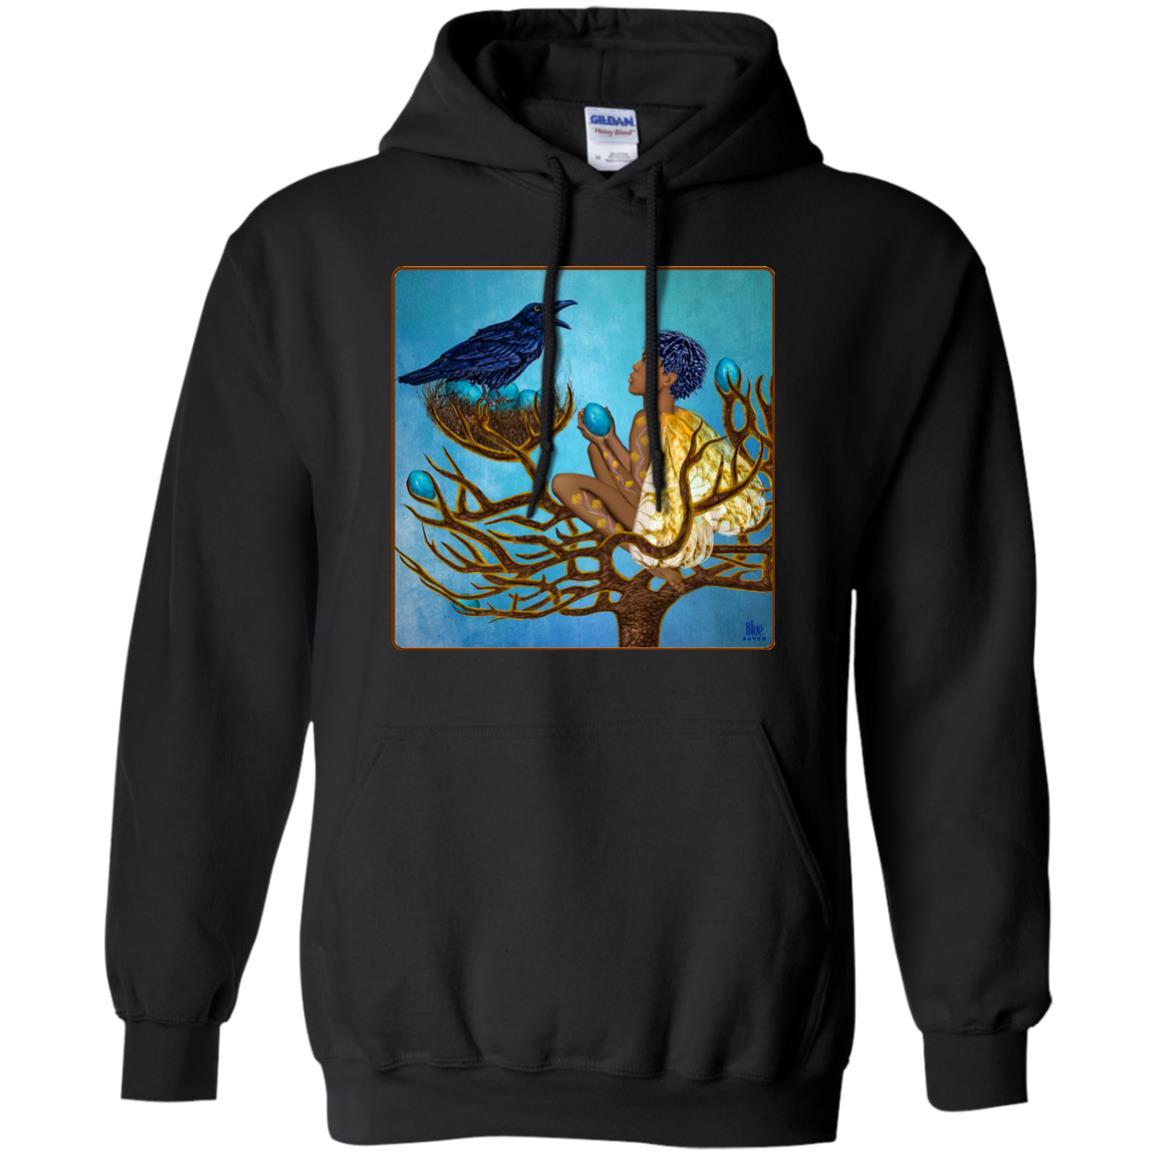 The blue raven's friend - Adult Hoodie